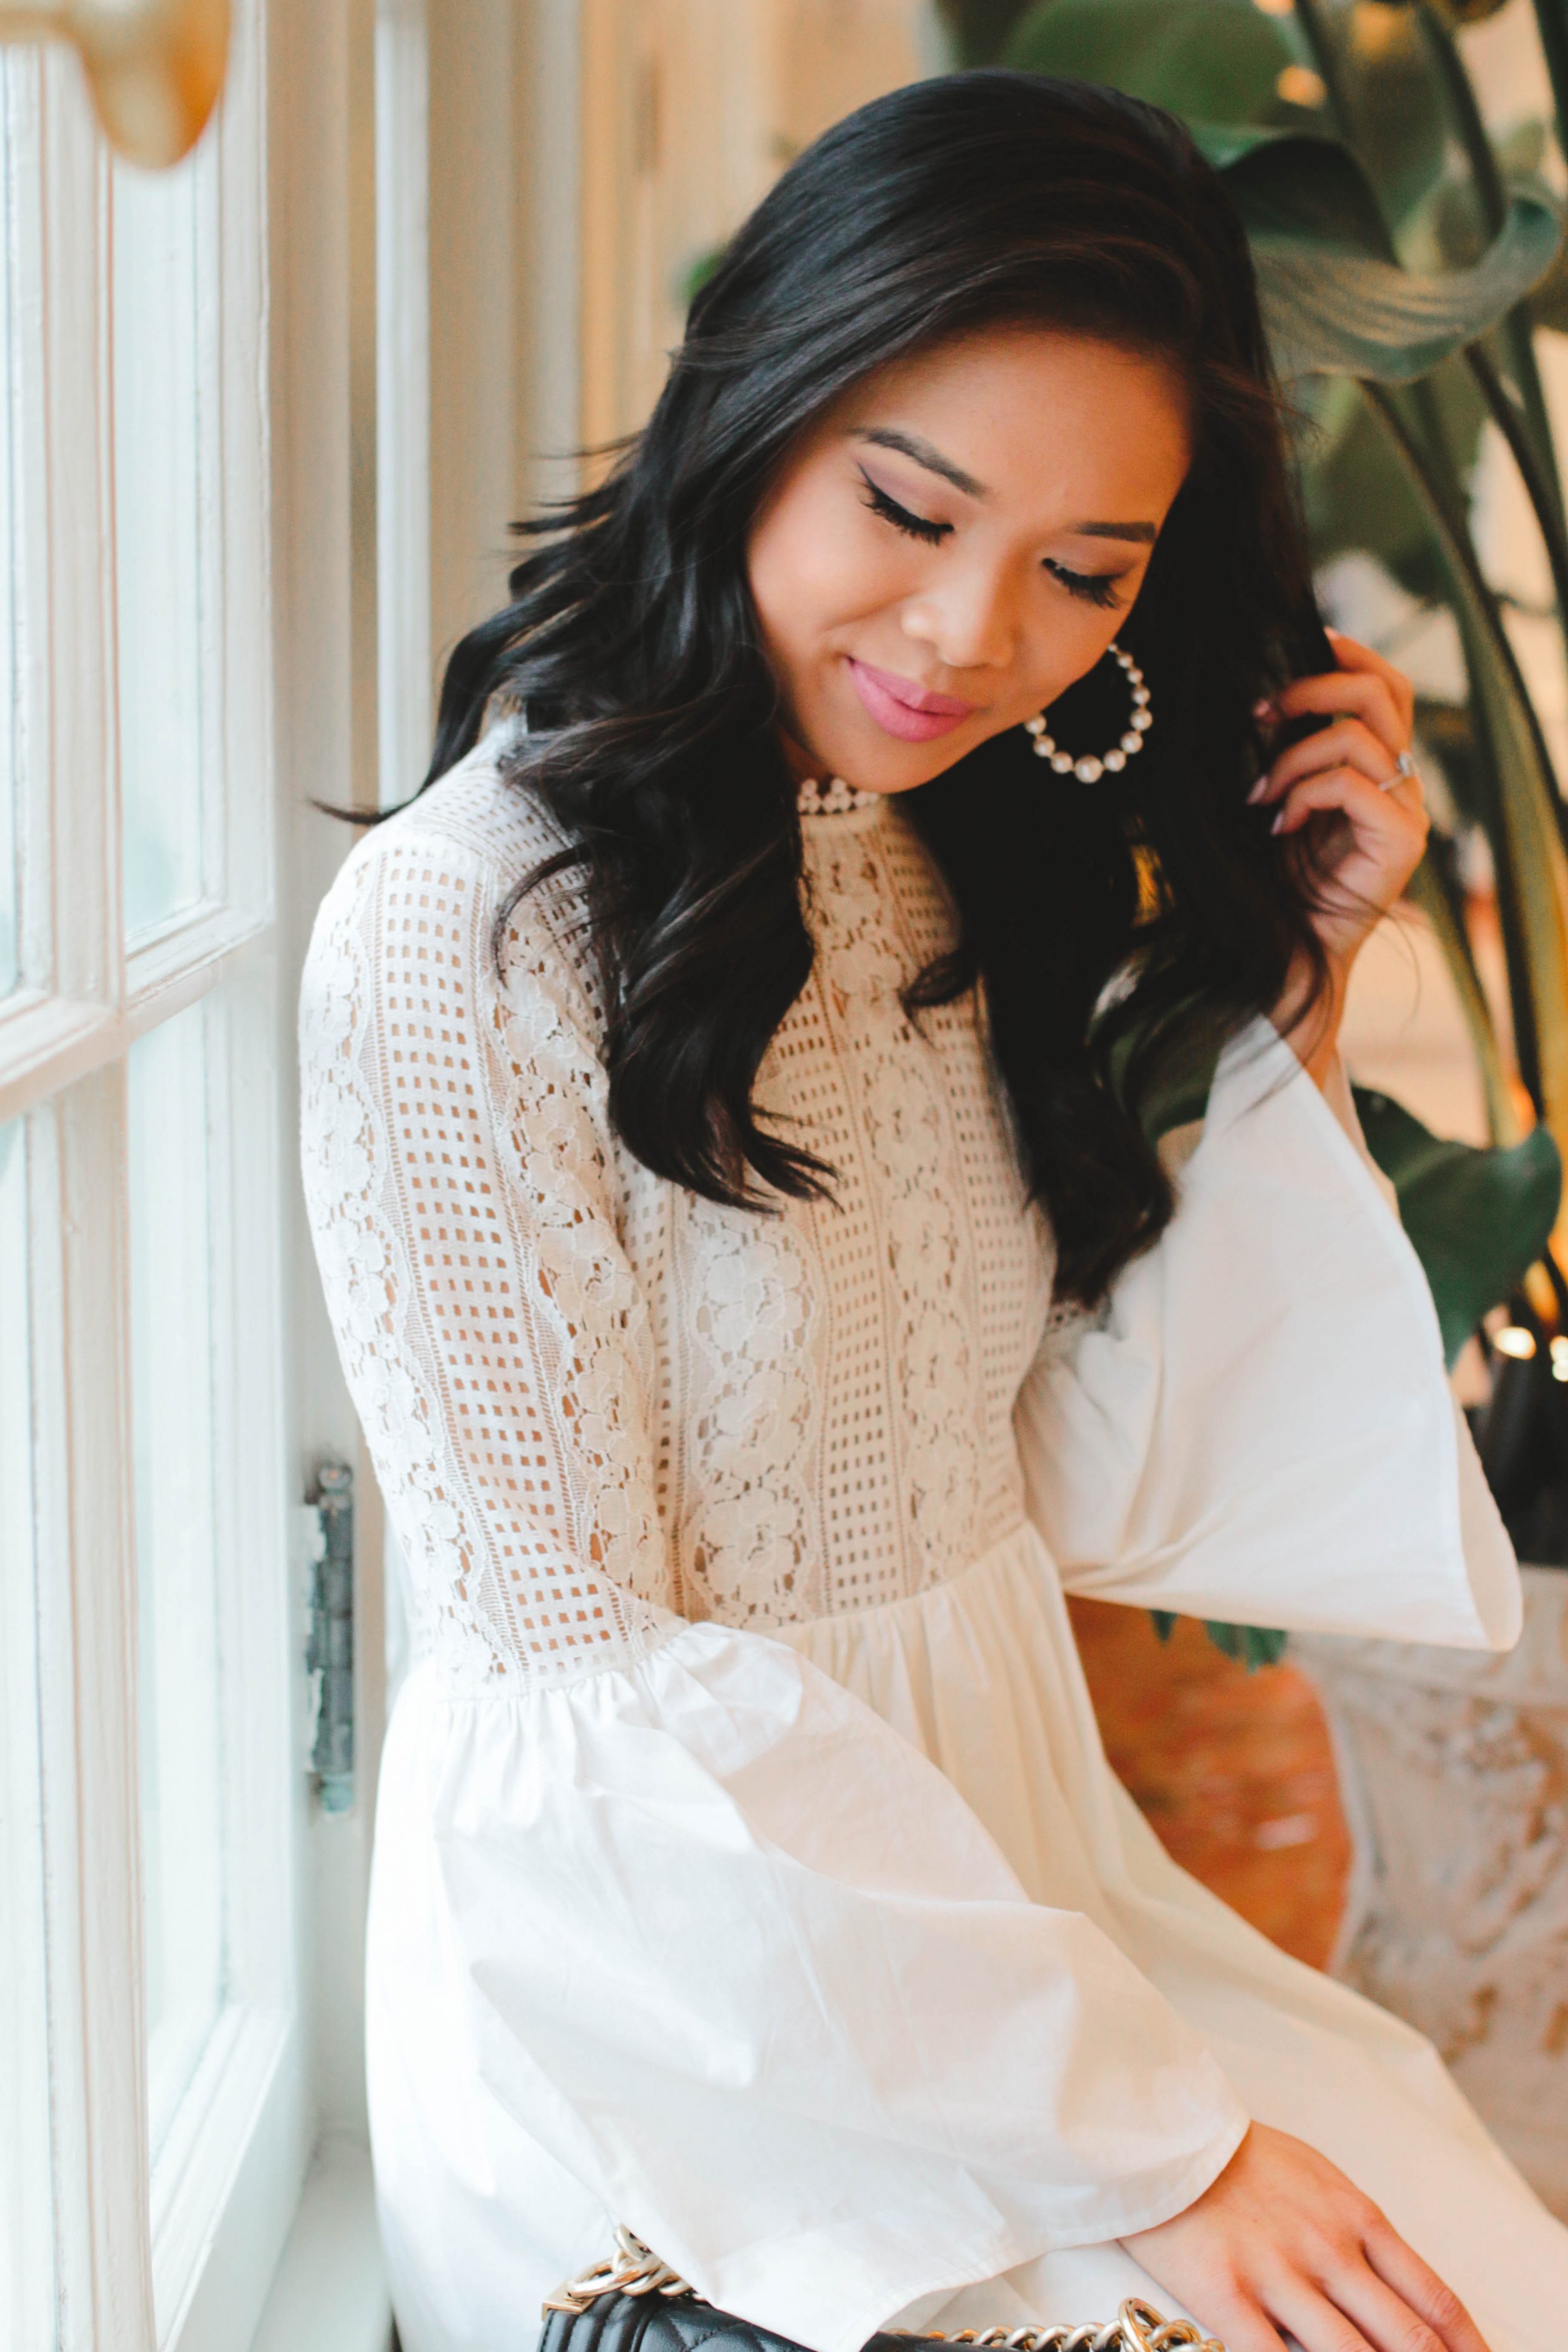 Hoang-Kim wears a white lace dress with olive + piper pearl hoop earrings at The Cavalier Hotel in Virginia beach